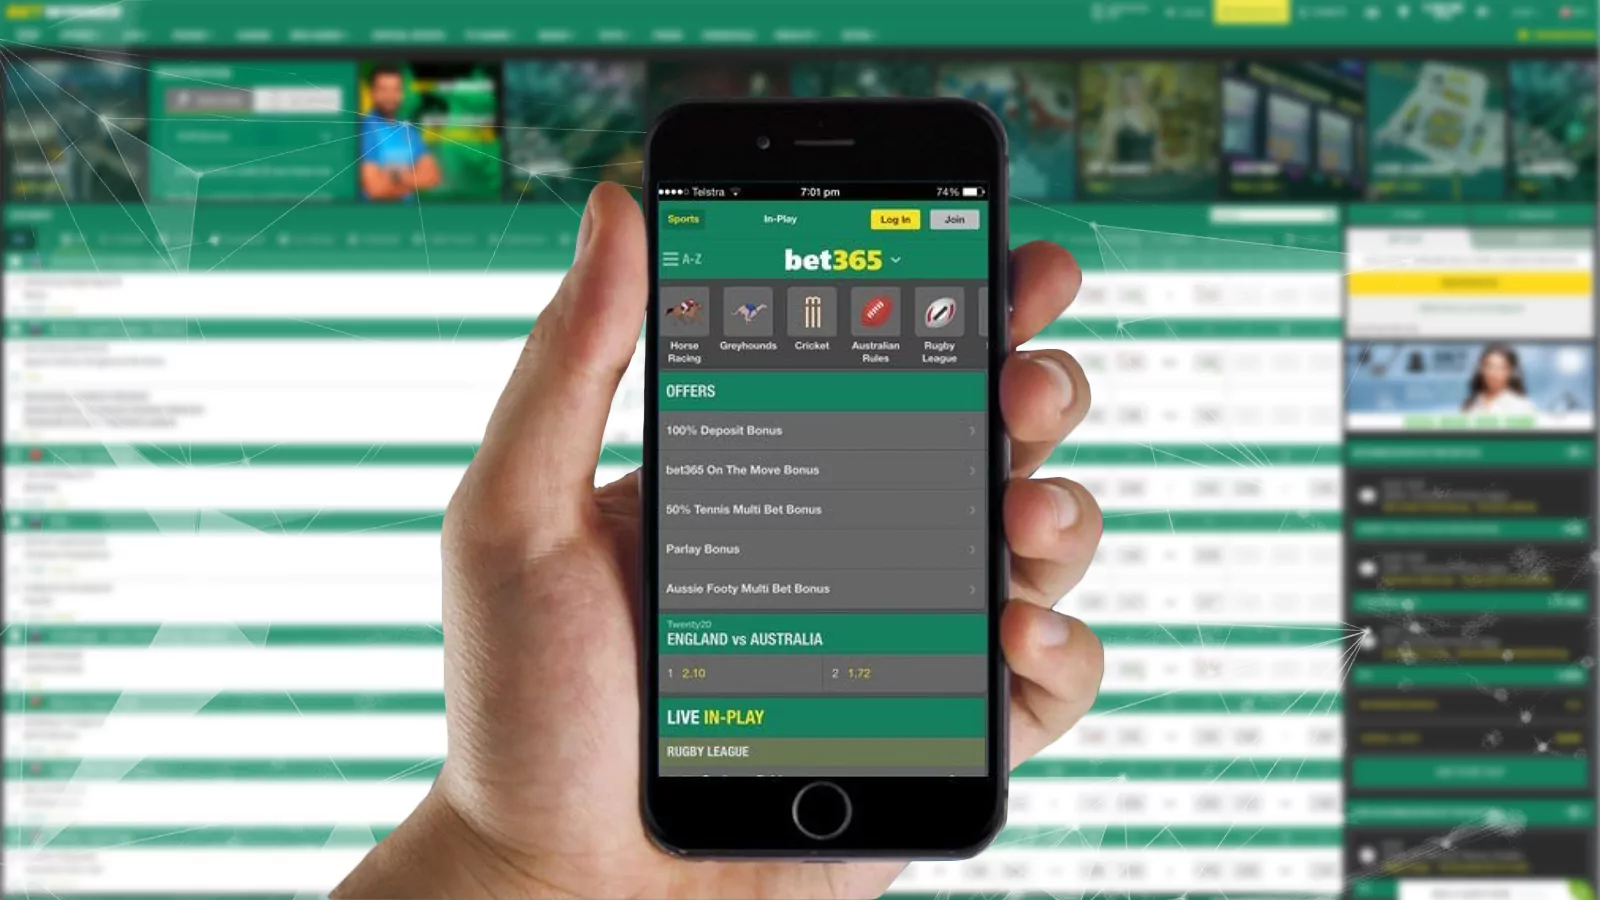 You can bet Rupees on IPL cricket matches via Bet365.